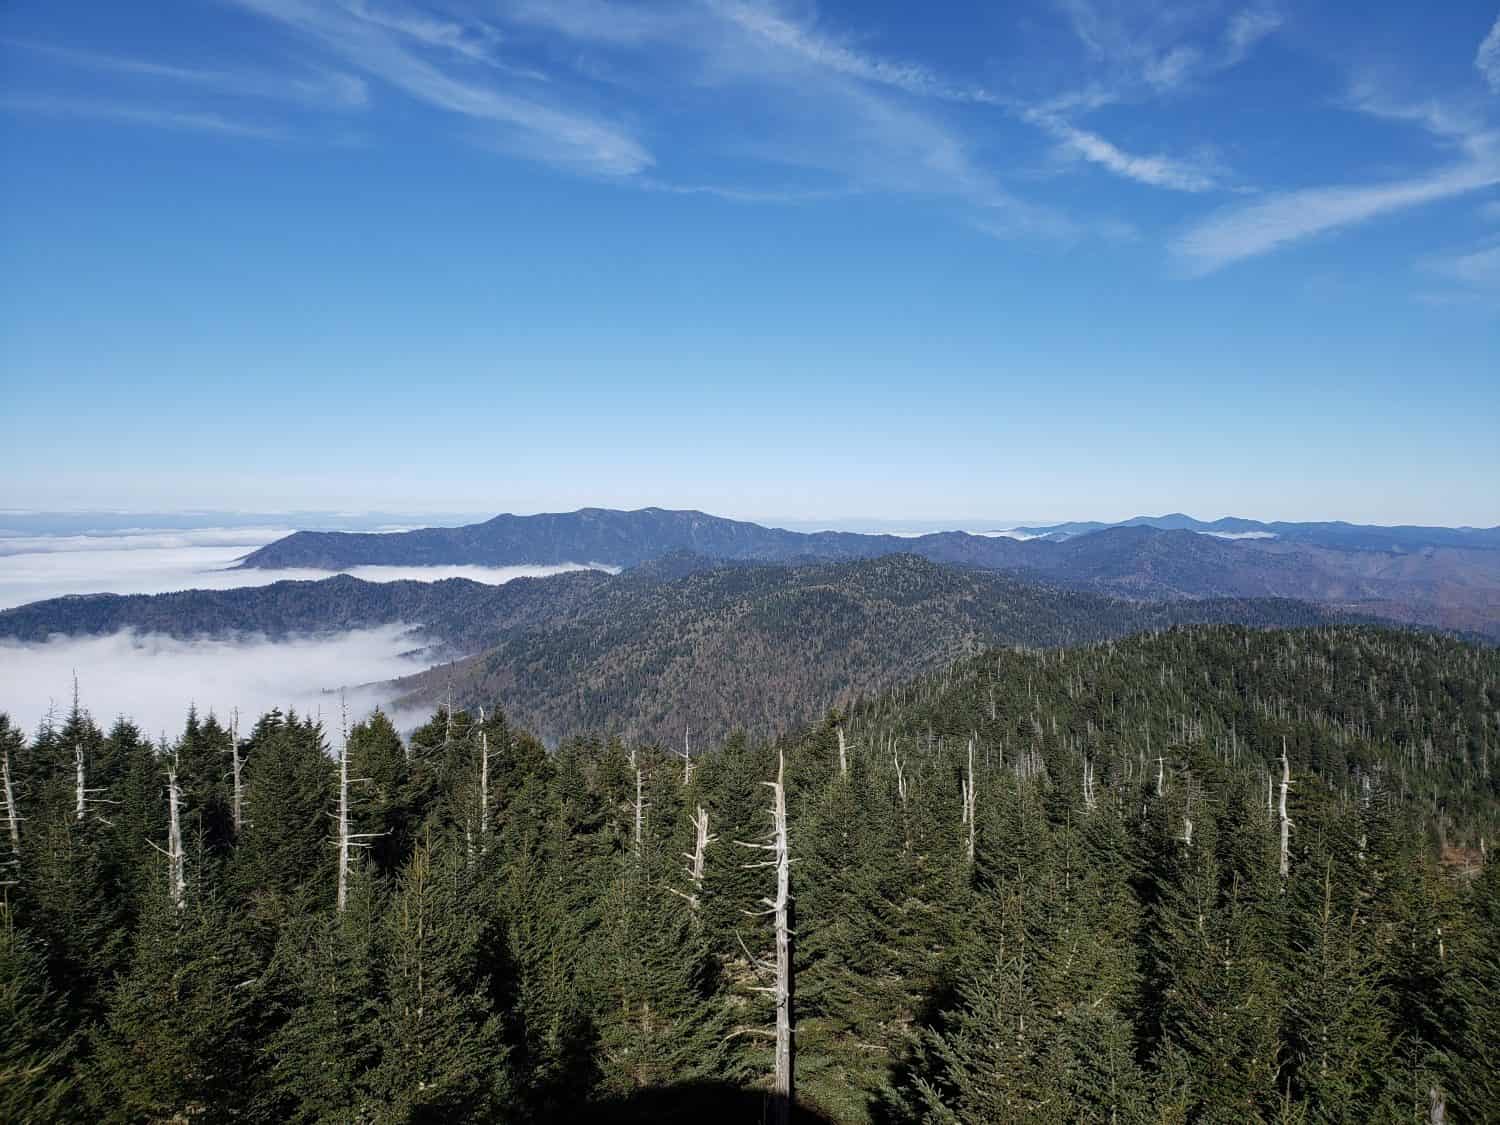 Looking north from Clingman's Dome to Mount Le Conte